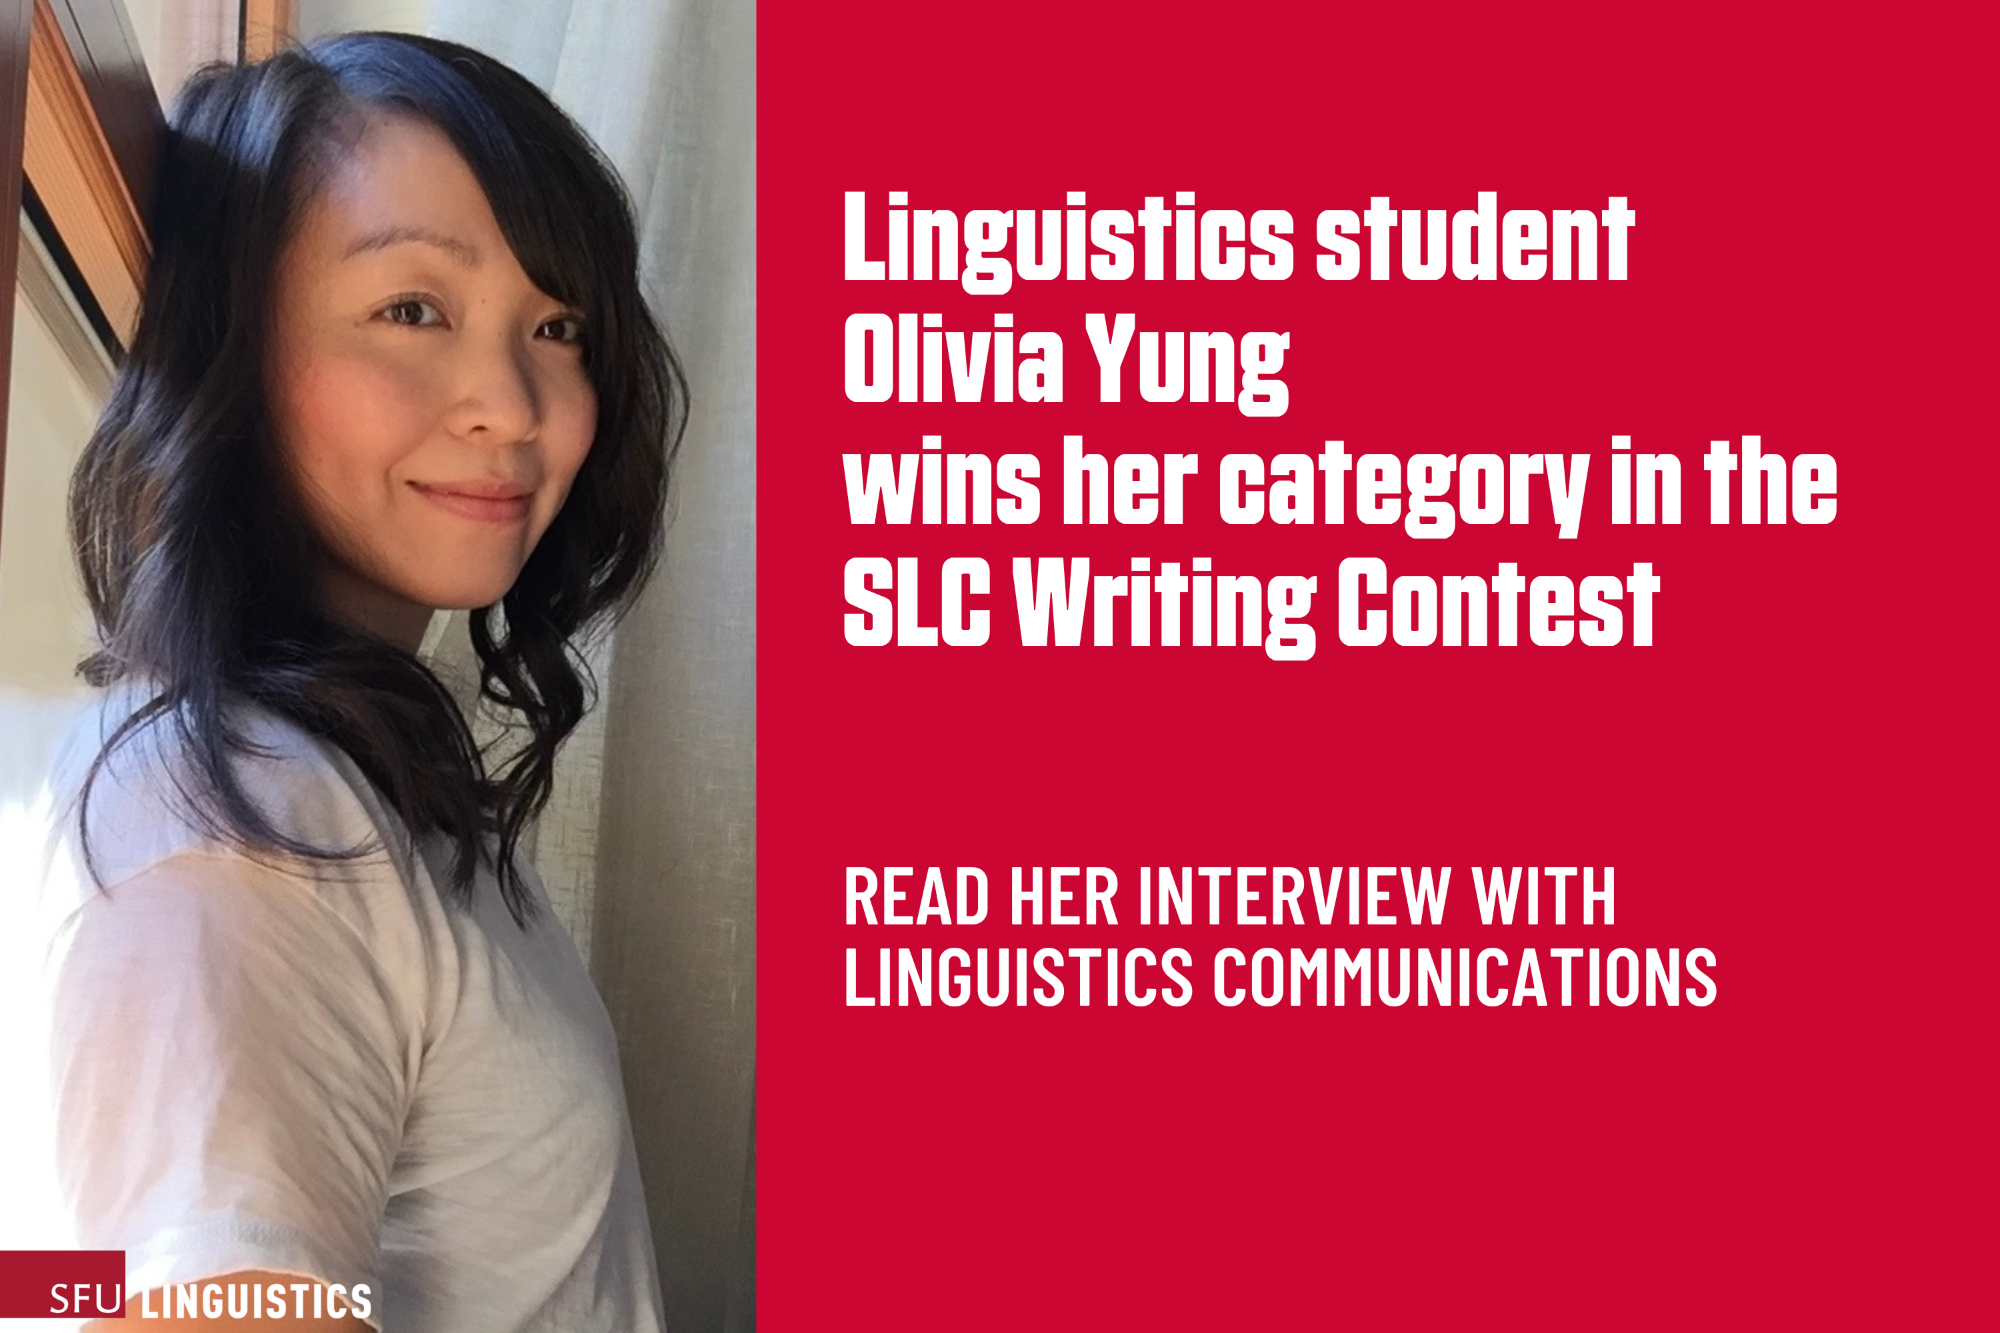 Linguistics student Olivia Yung wins her category in the SLC Writing Contest